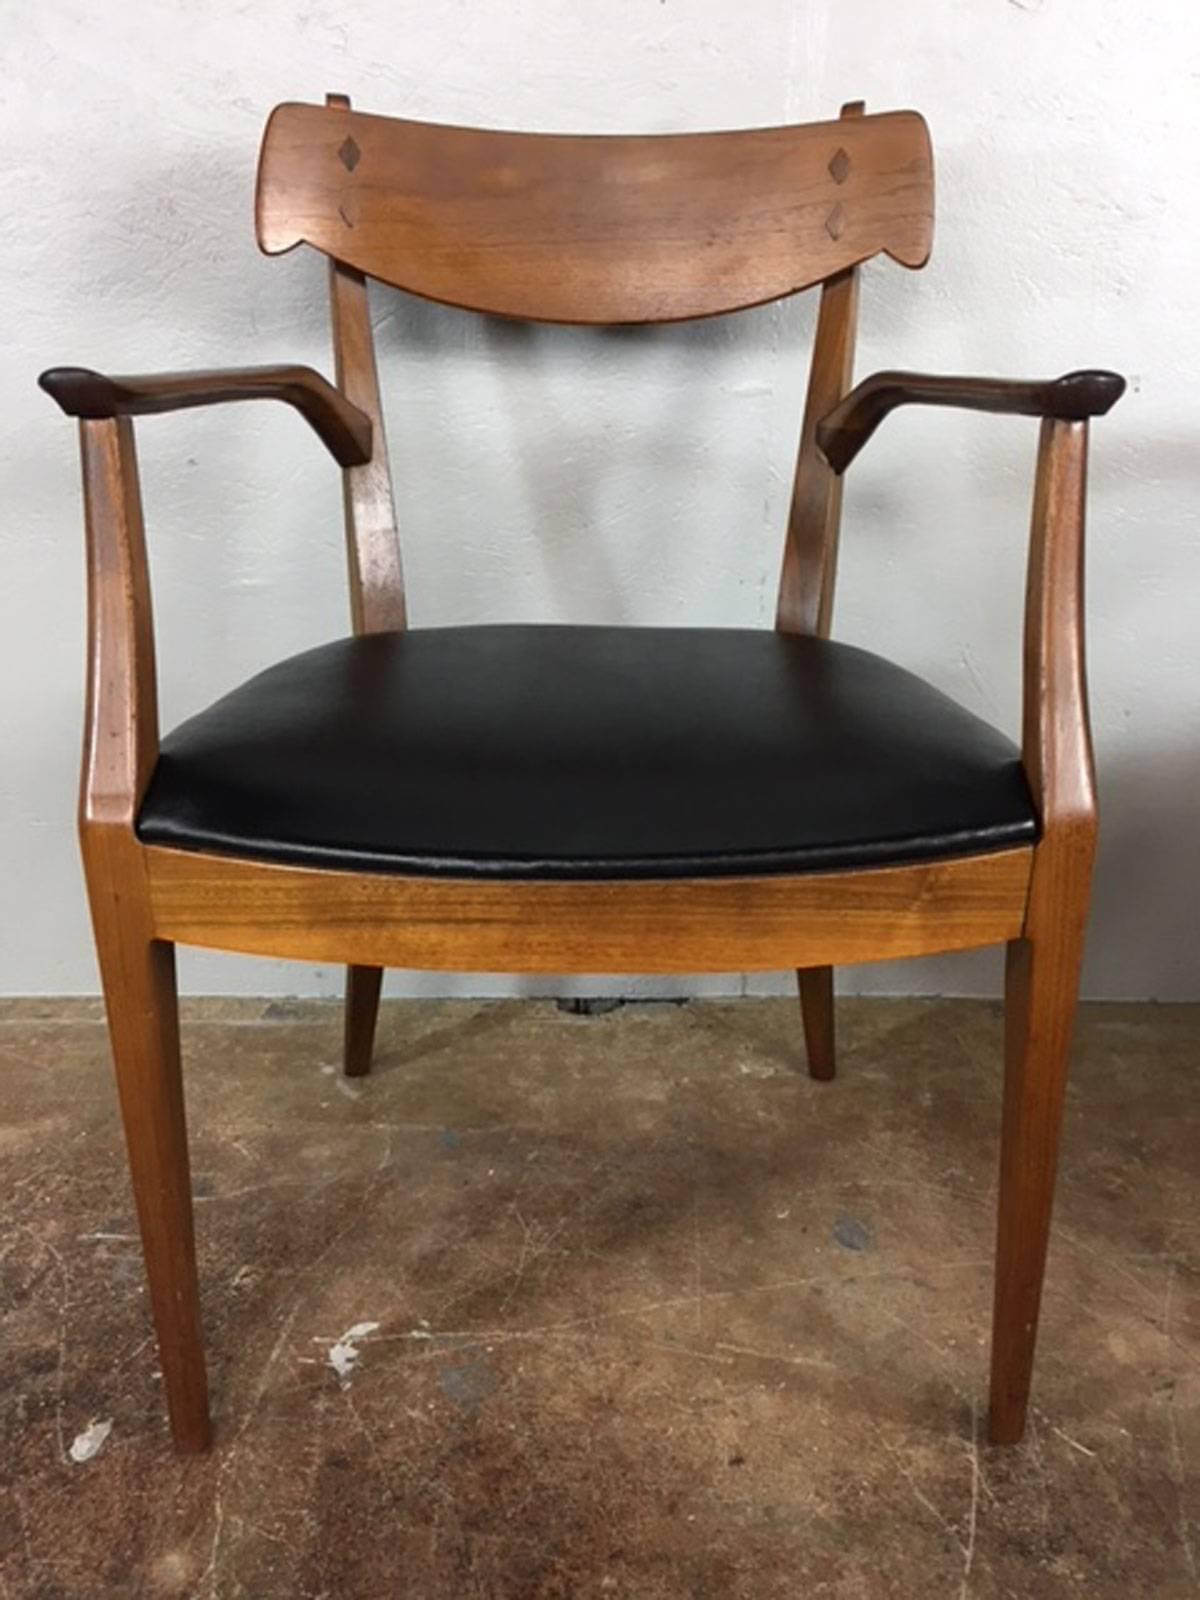 Set of four dining chairs by Kipp Stewart for Drexel in rich walnut and leather. No rips, tears, holes, or unusual wear. Original condition. 

Seat height is 17 inches.